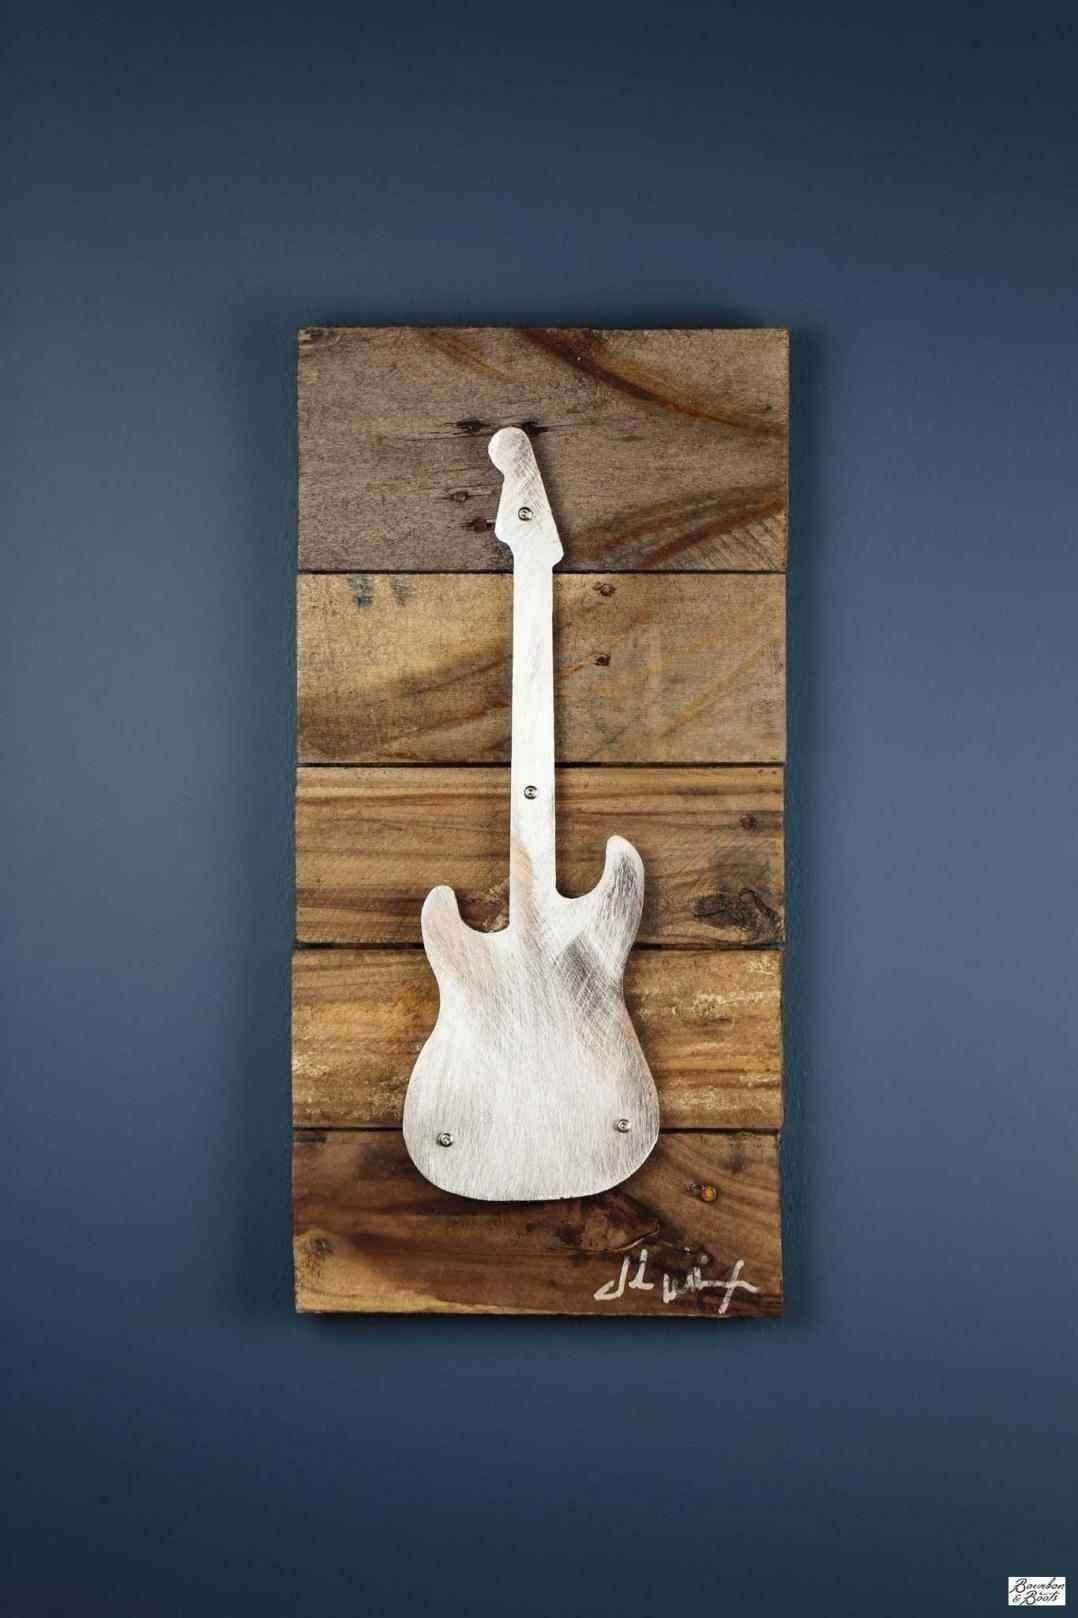 Metal Wall Art | Home Interior Decor Intended For Best And Newest Guitar Metal Wall Art (Gallery 27 of 30)